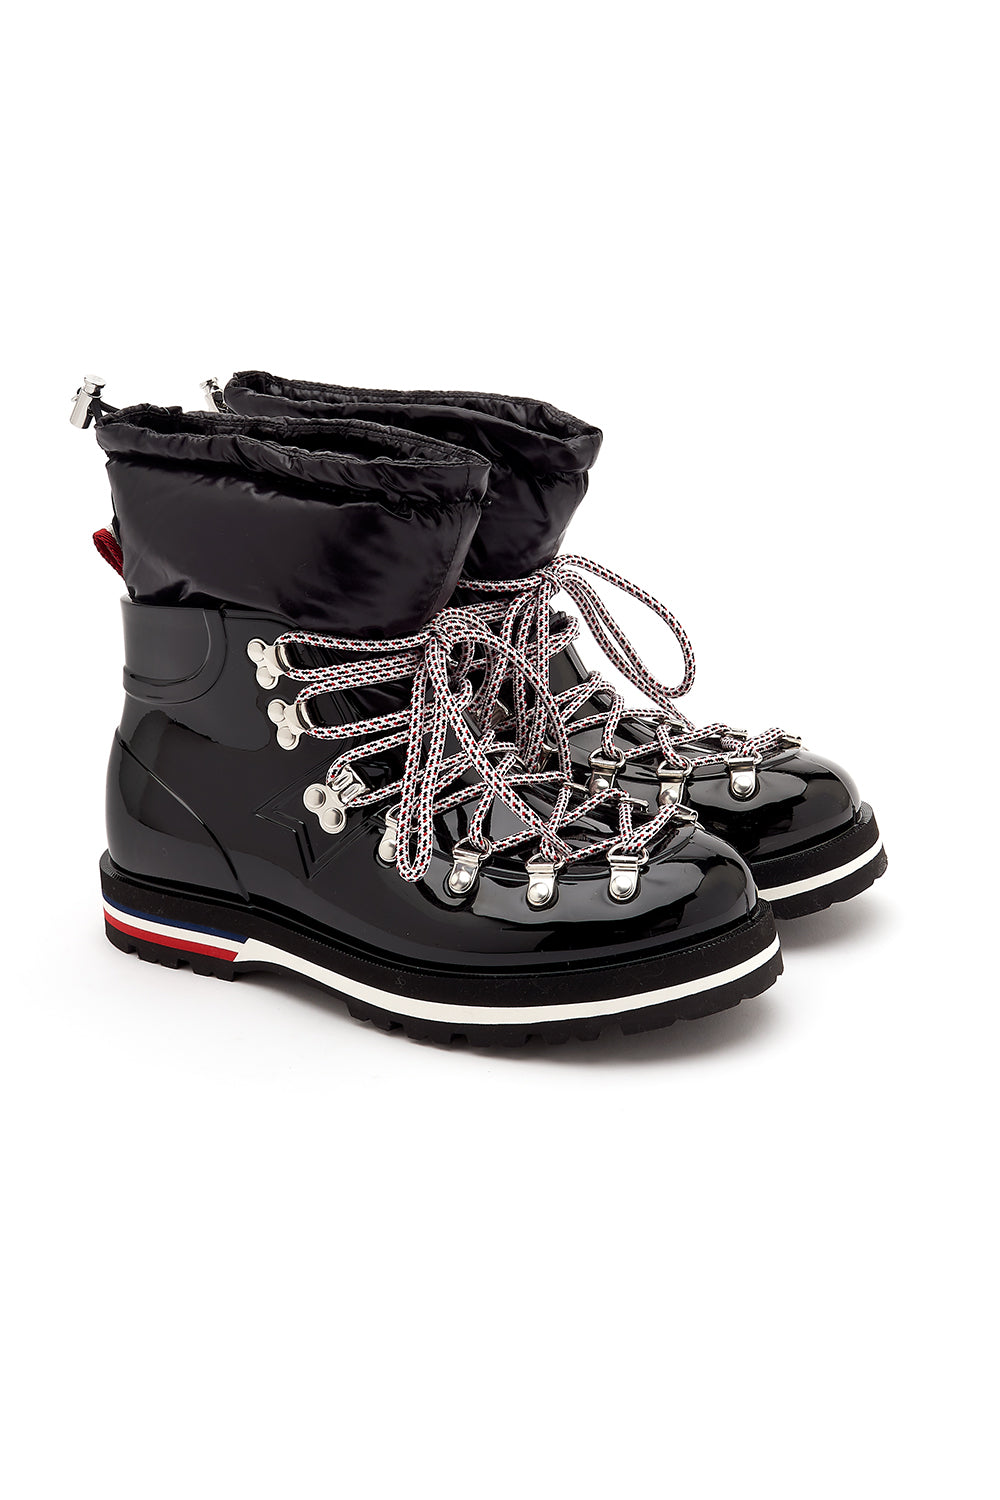 Moncler Inaya Women's Rubber and Down Ankle Boots Black - Front View